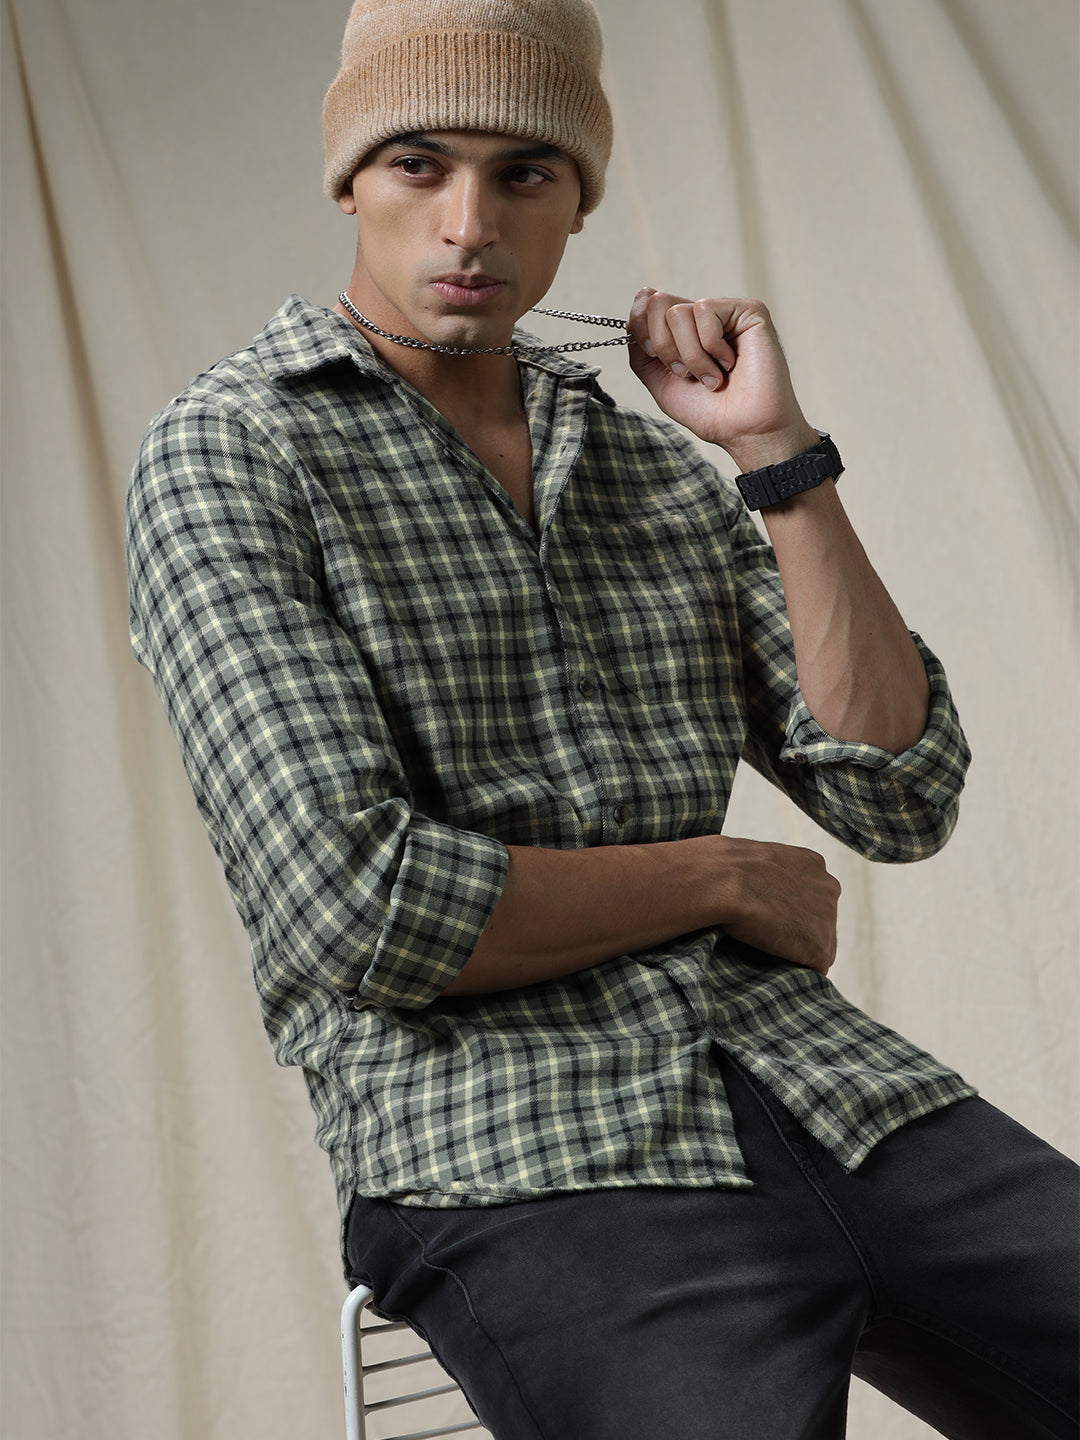 Checked Grids Green Shirt